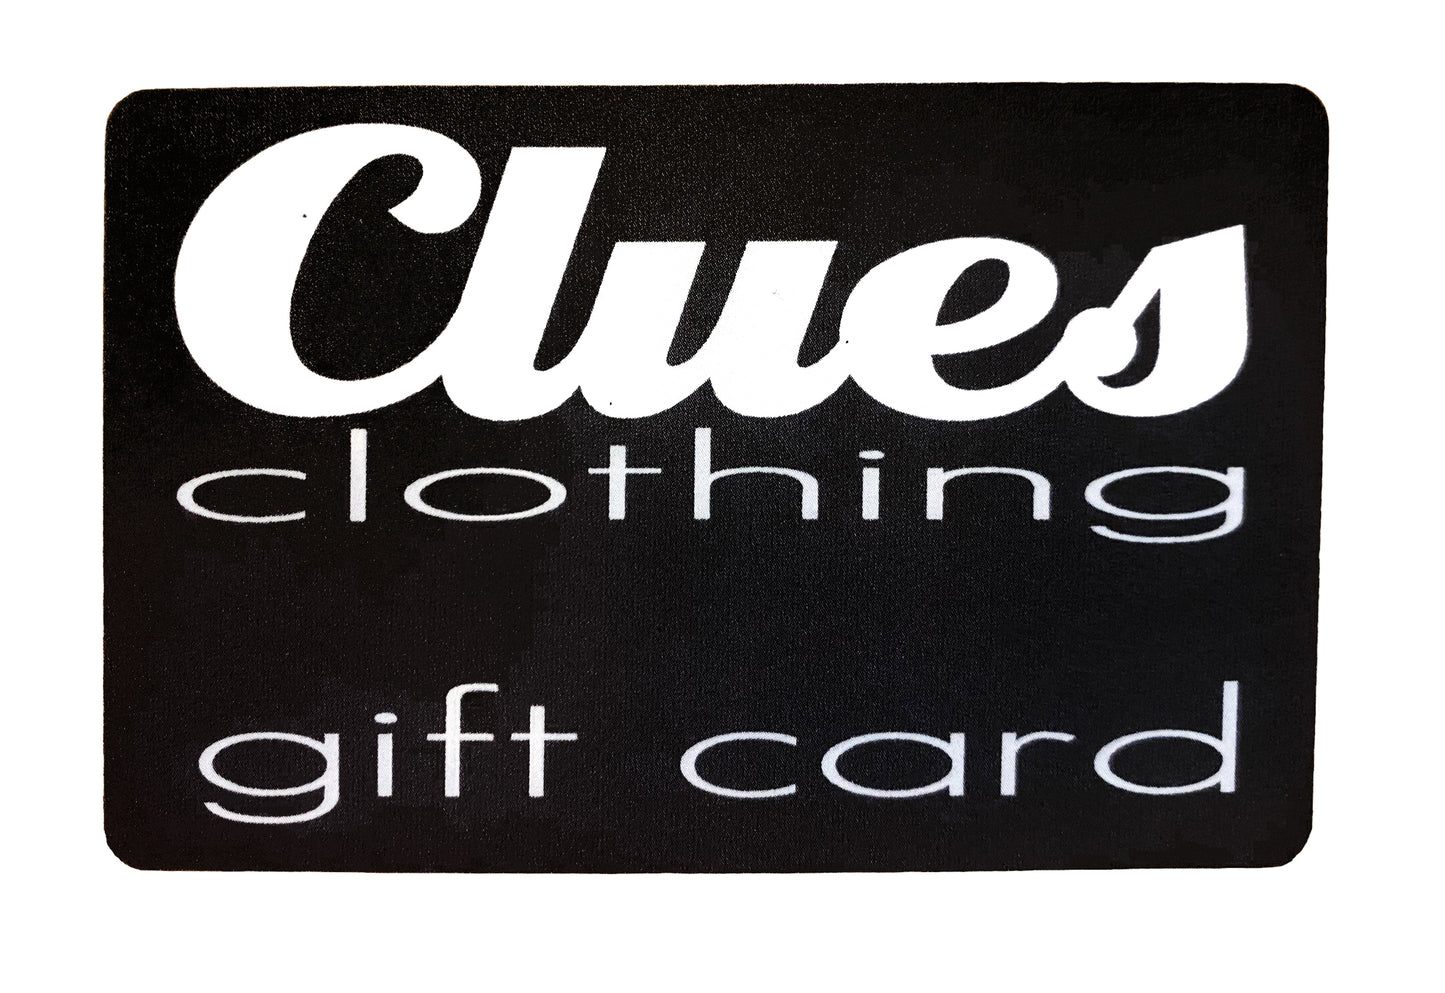 Clues & Cloud8 gift cards